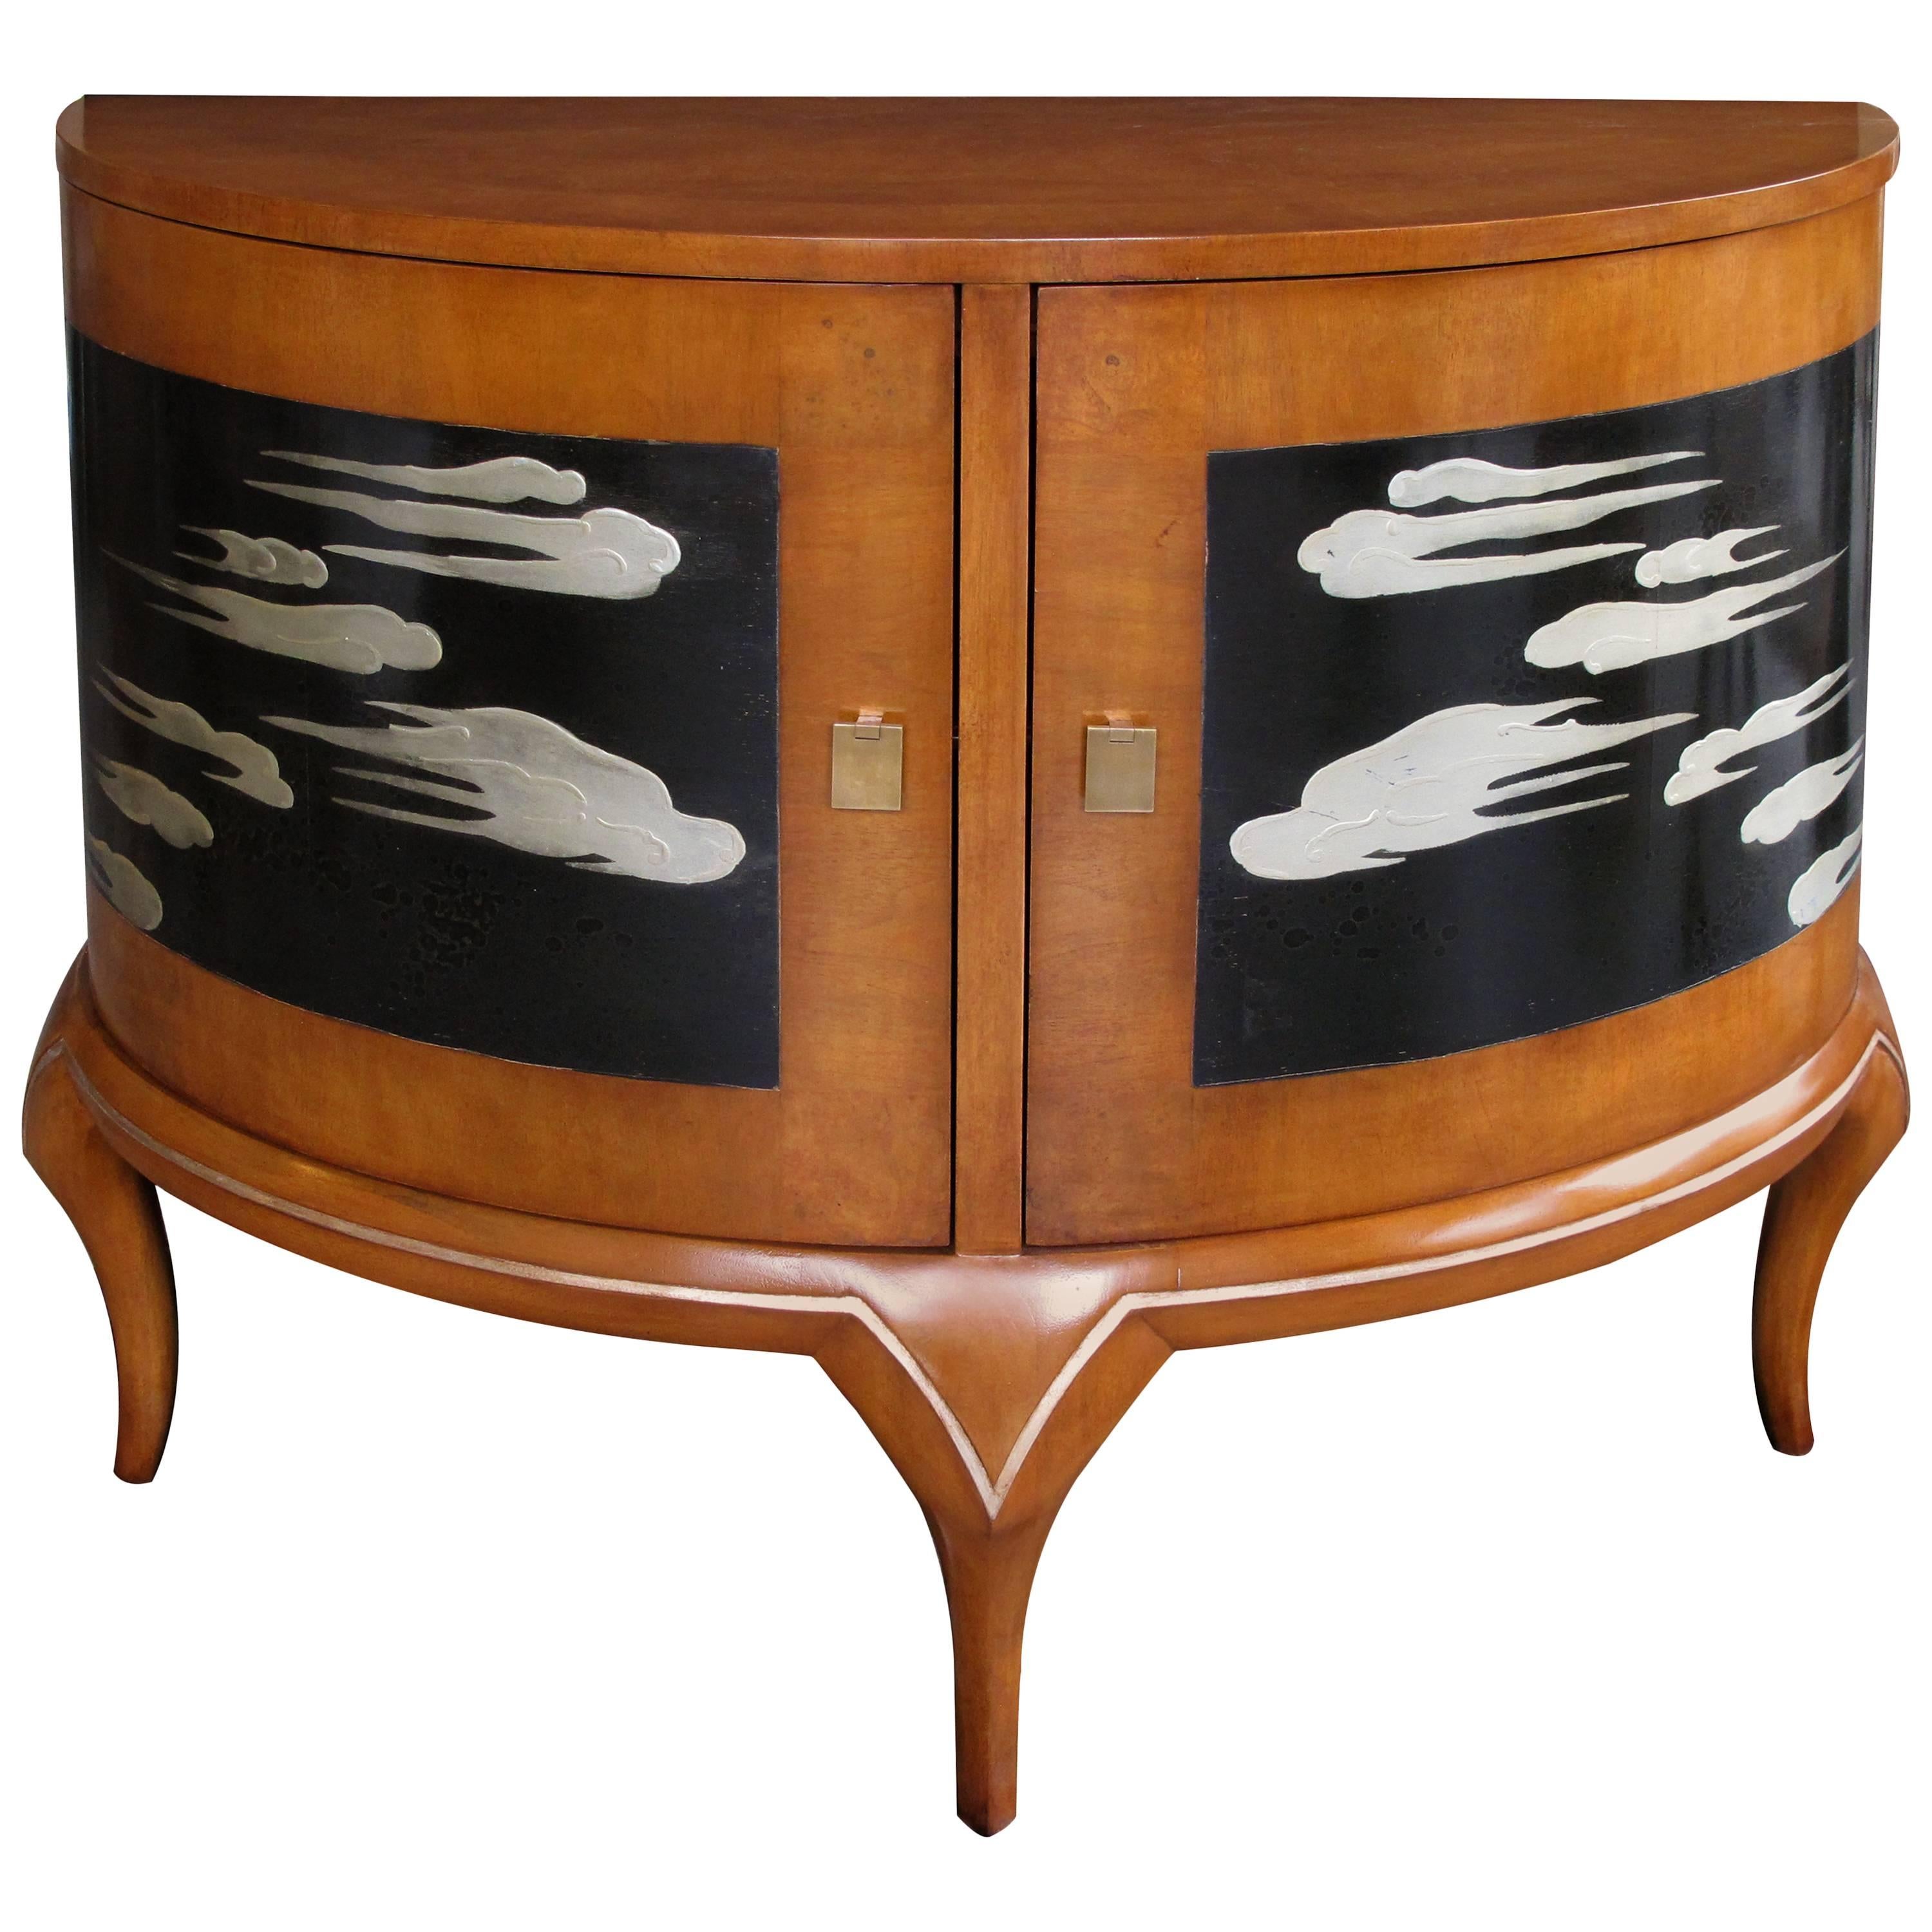 Chic American 1940s Maplewood Demilune Cabinet by Robert W. Irwin Co